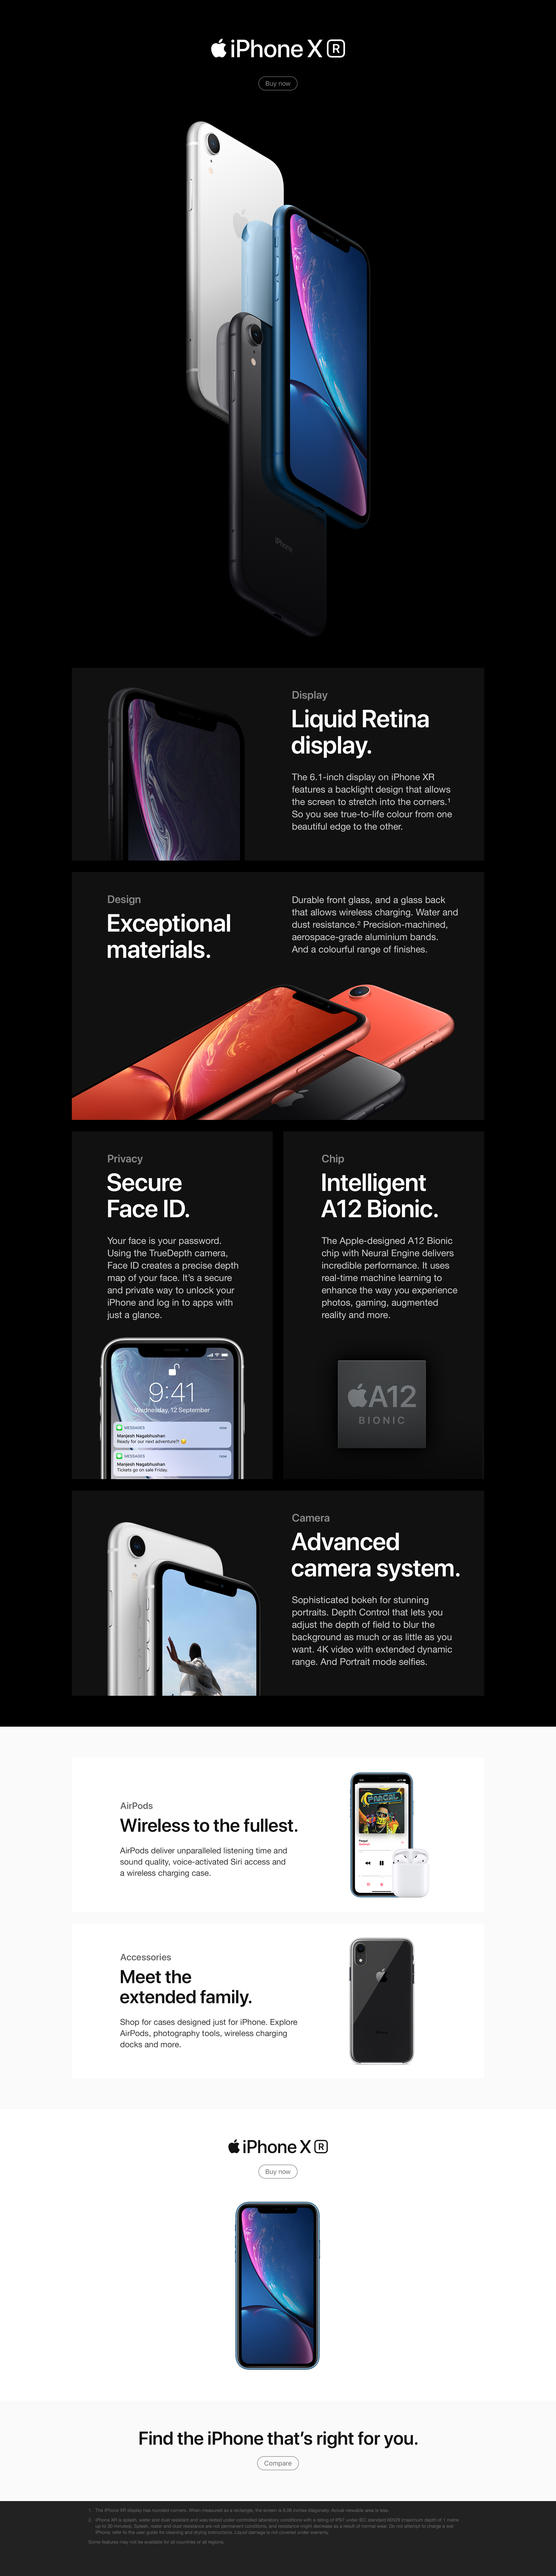 Amazon Sale: Amazon offers on all models of iPhone XR, 13 thousand discount in the deal and up to 15 thousand cashback